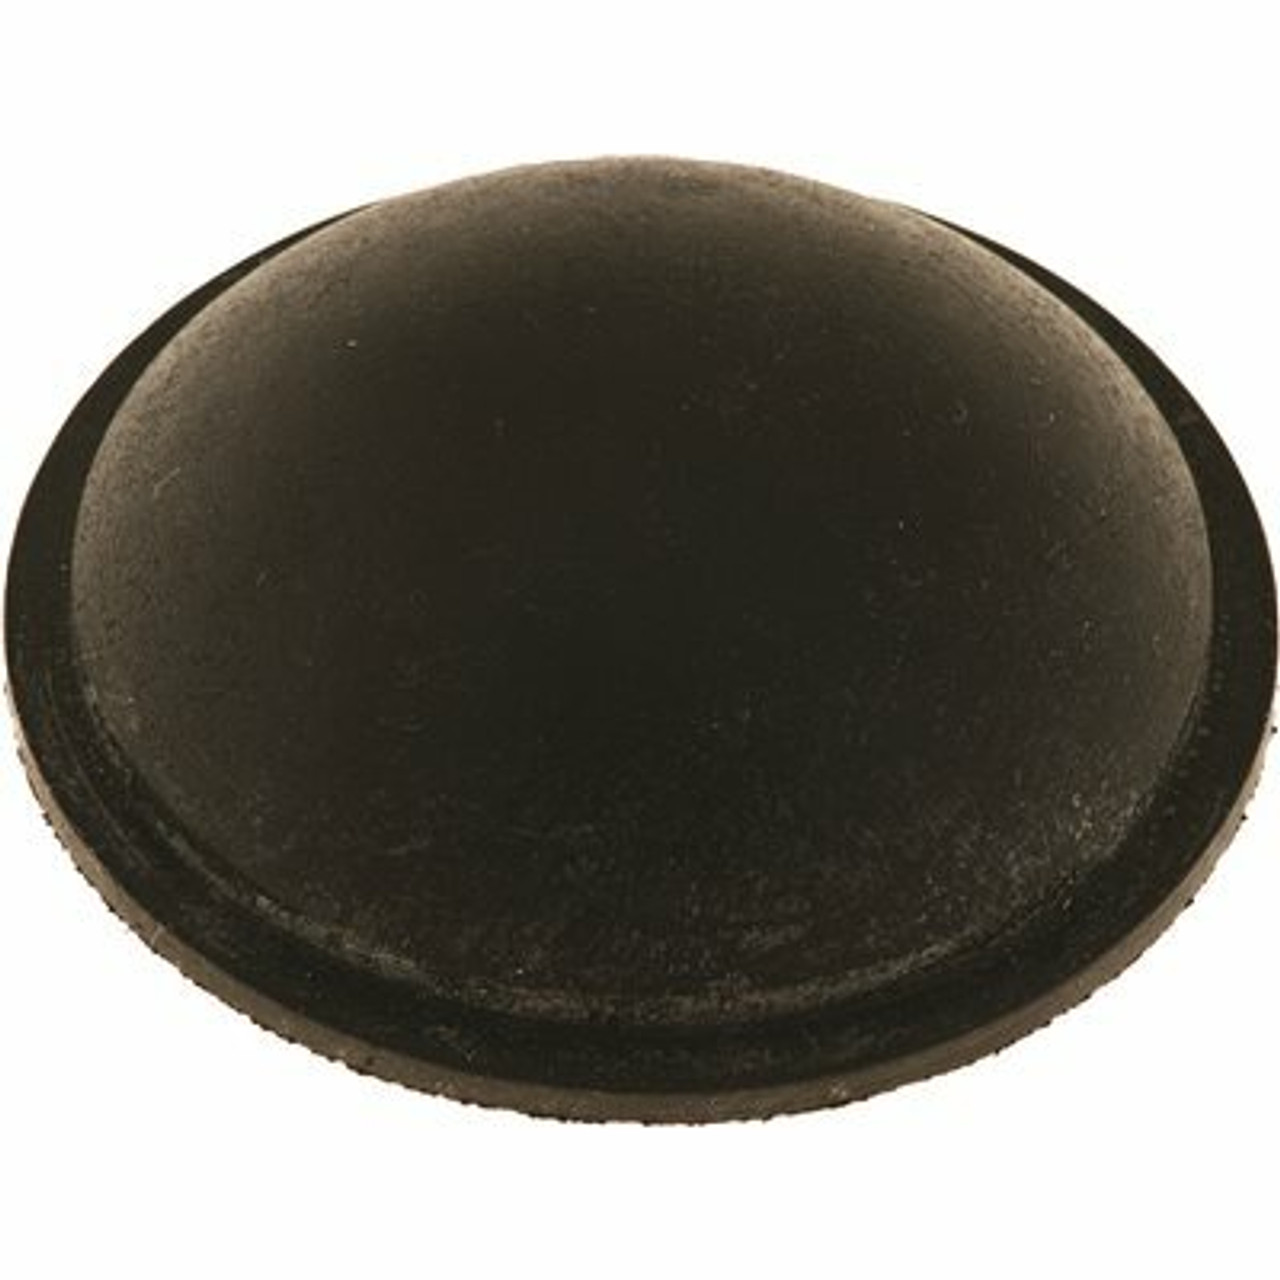 Willoughby Willoughby Diaphragm For Pneumatic Pump-Neoprene 600201